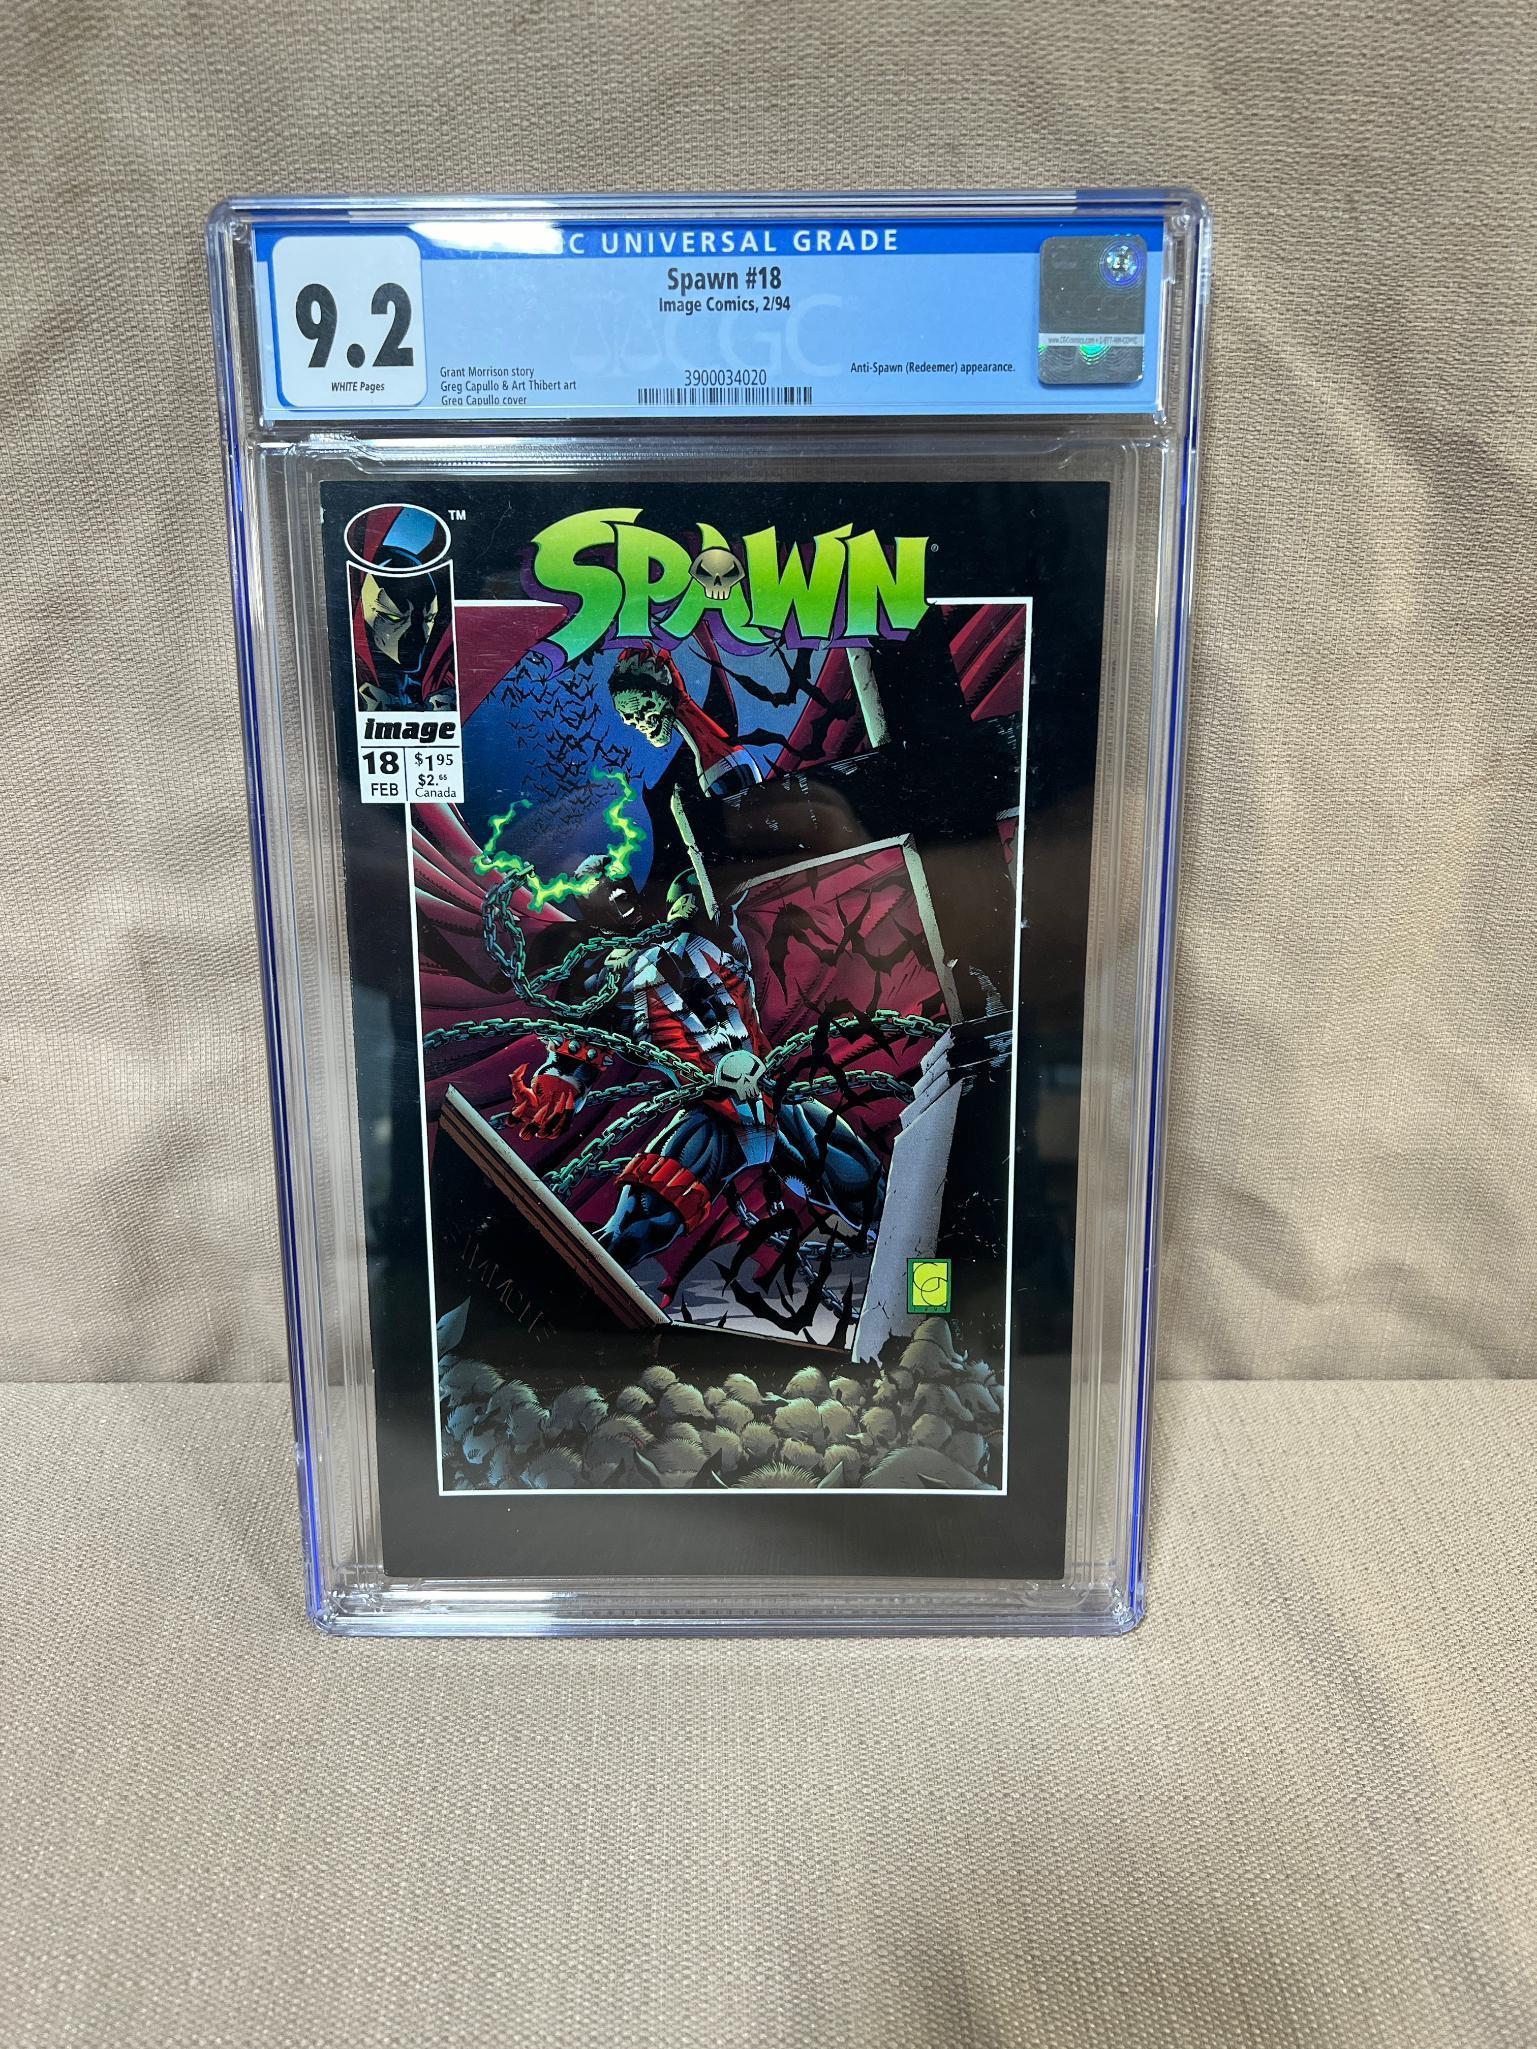 Spawn #18 Comic book graded 9.2 in CGC holder